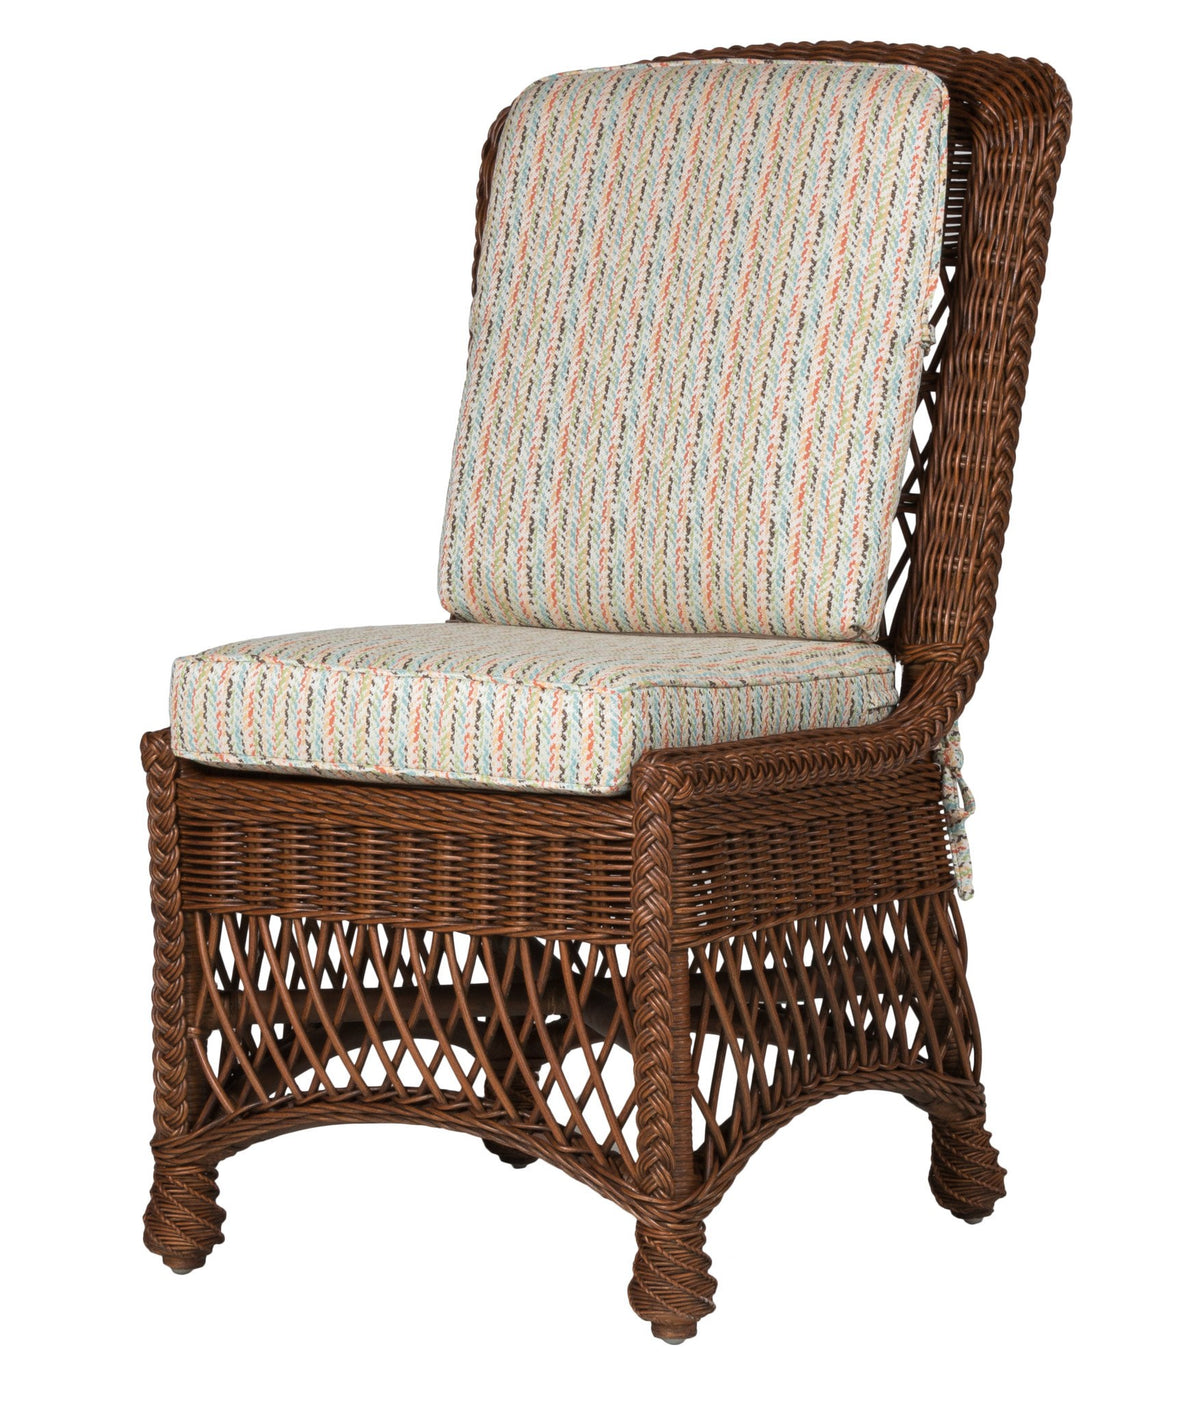 Designer Wicker &amp; Rattan By Tribor Rockport Dining Side Chair by Designer Wicker from Tribor Dining Chair - Rattan Imports